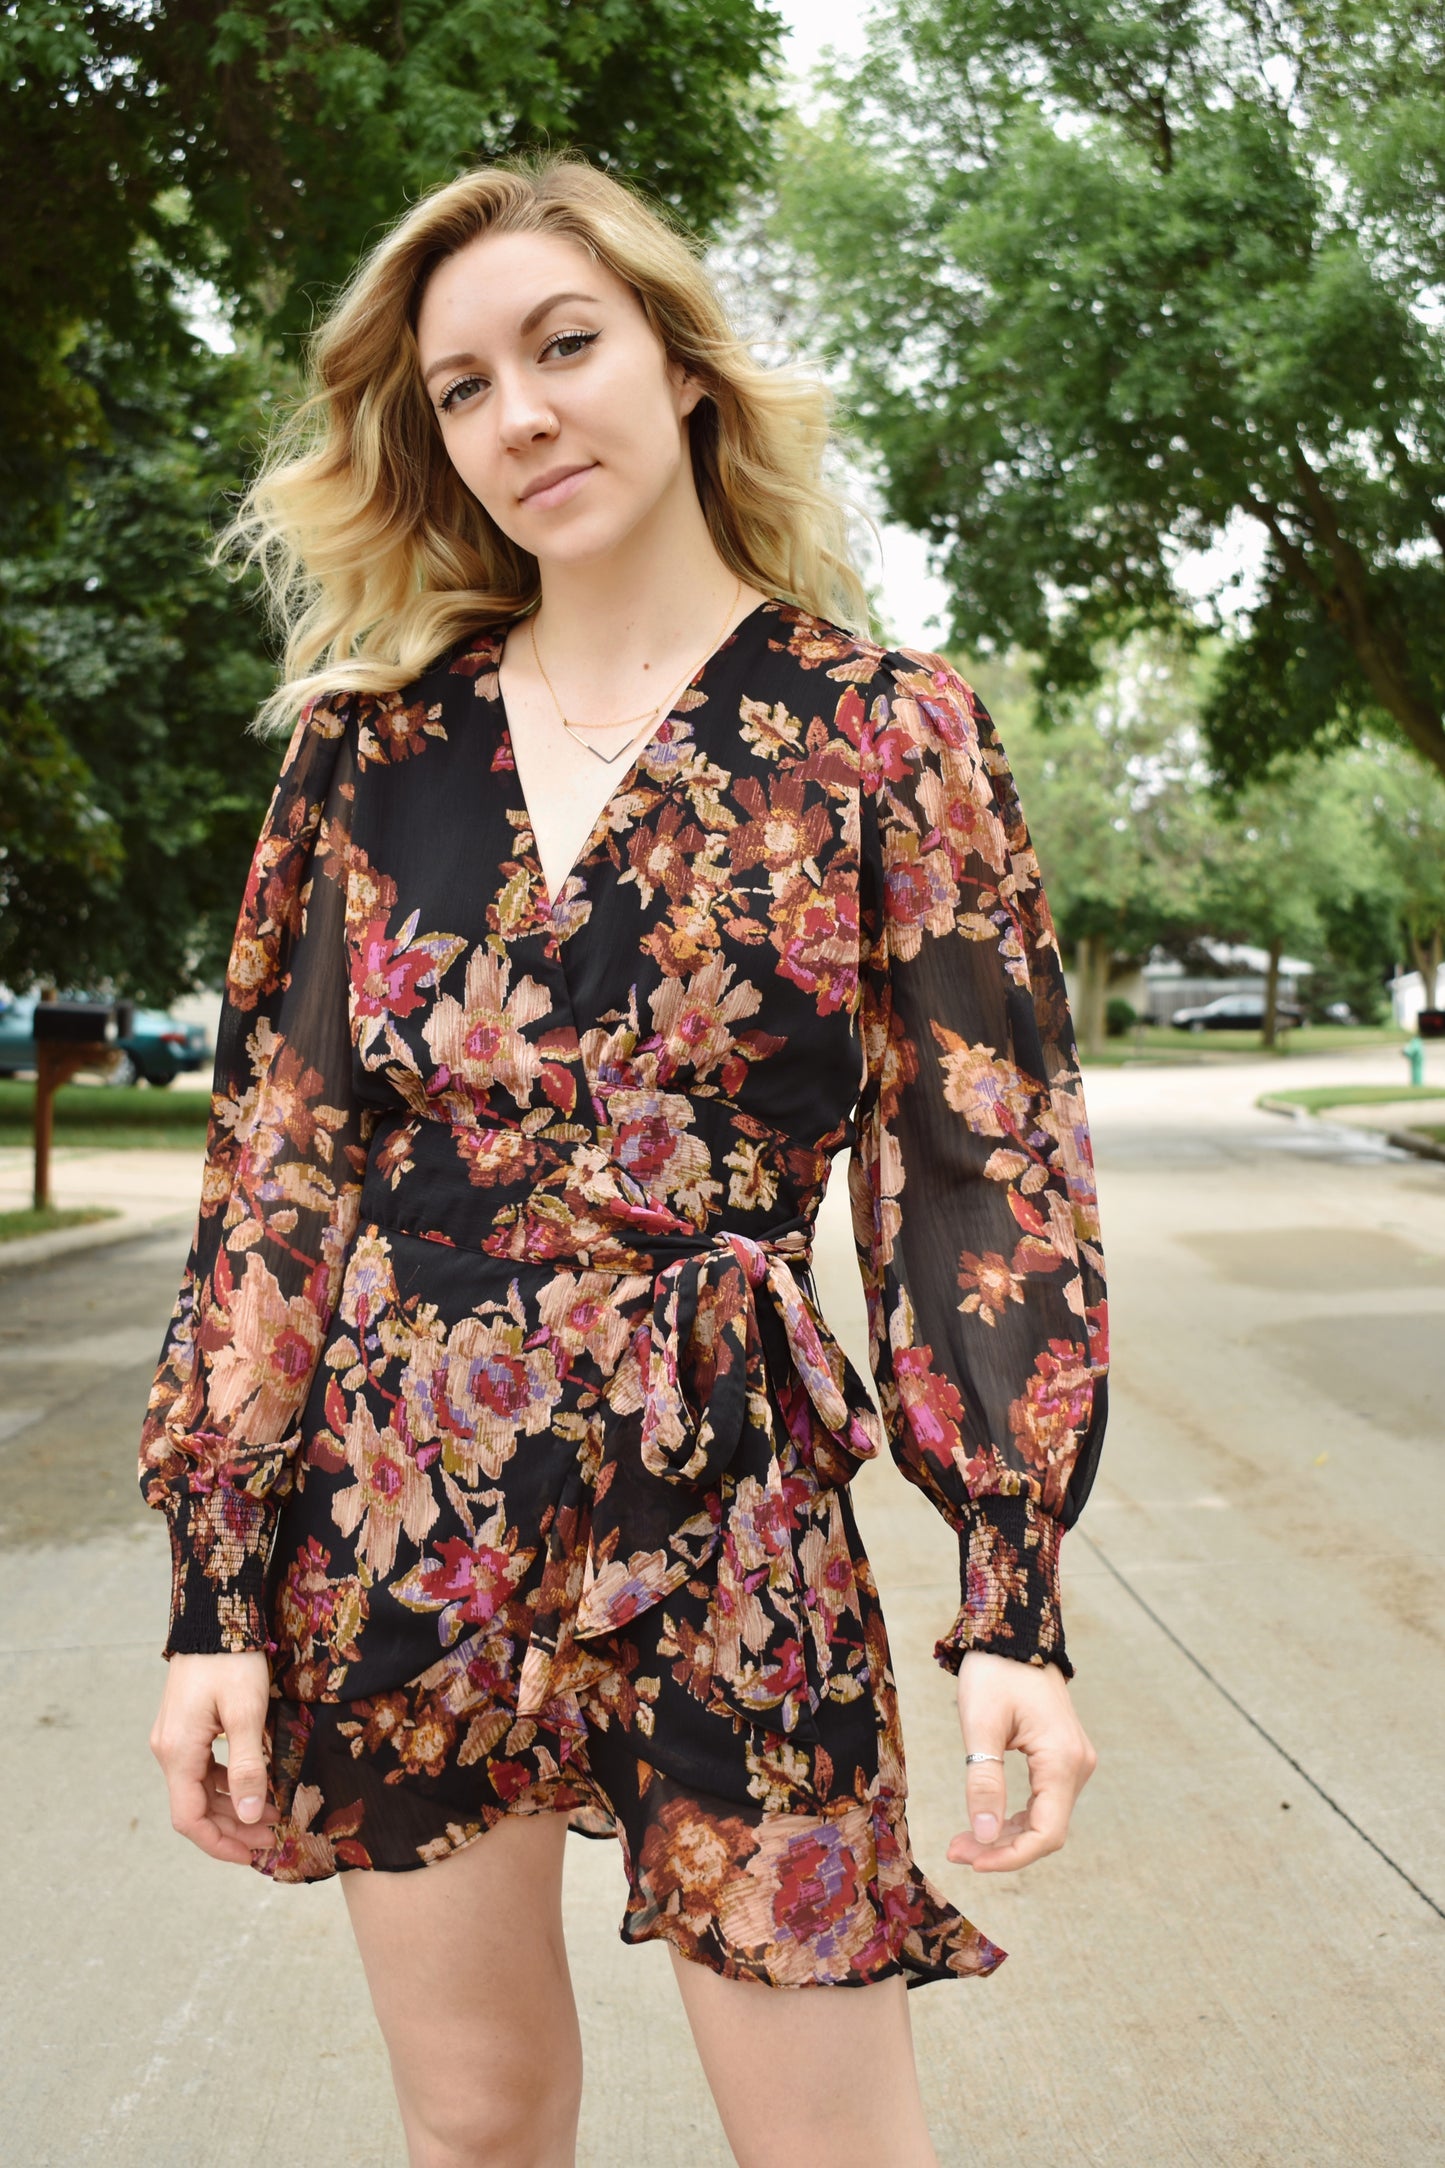 Floral print wrap mini dress with long bishop sleeves that have a smocked opening. Ruffle edged hem.